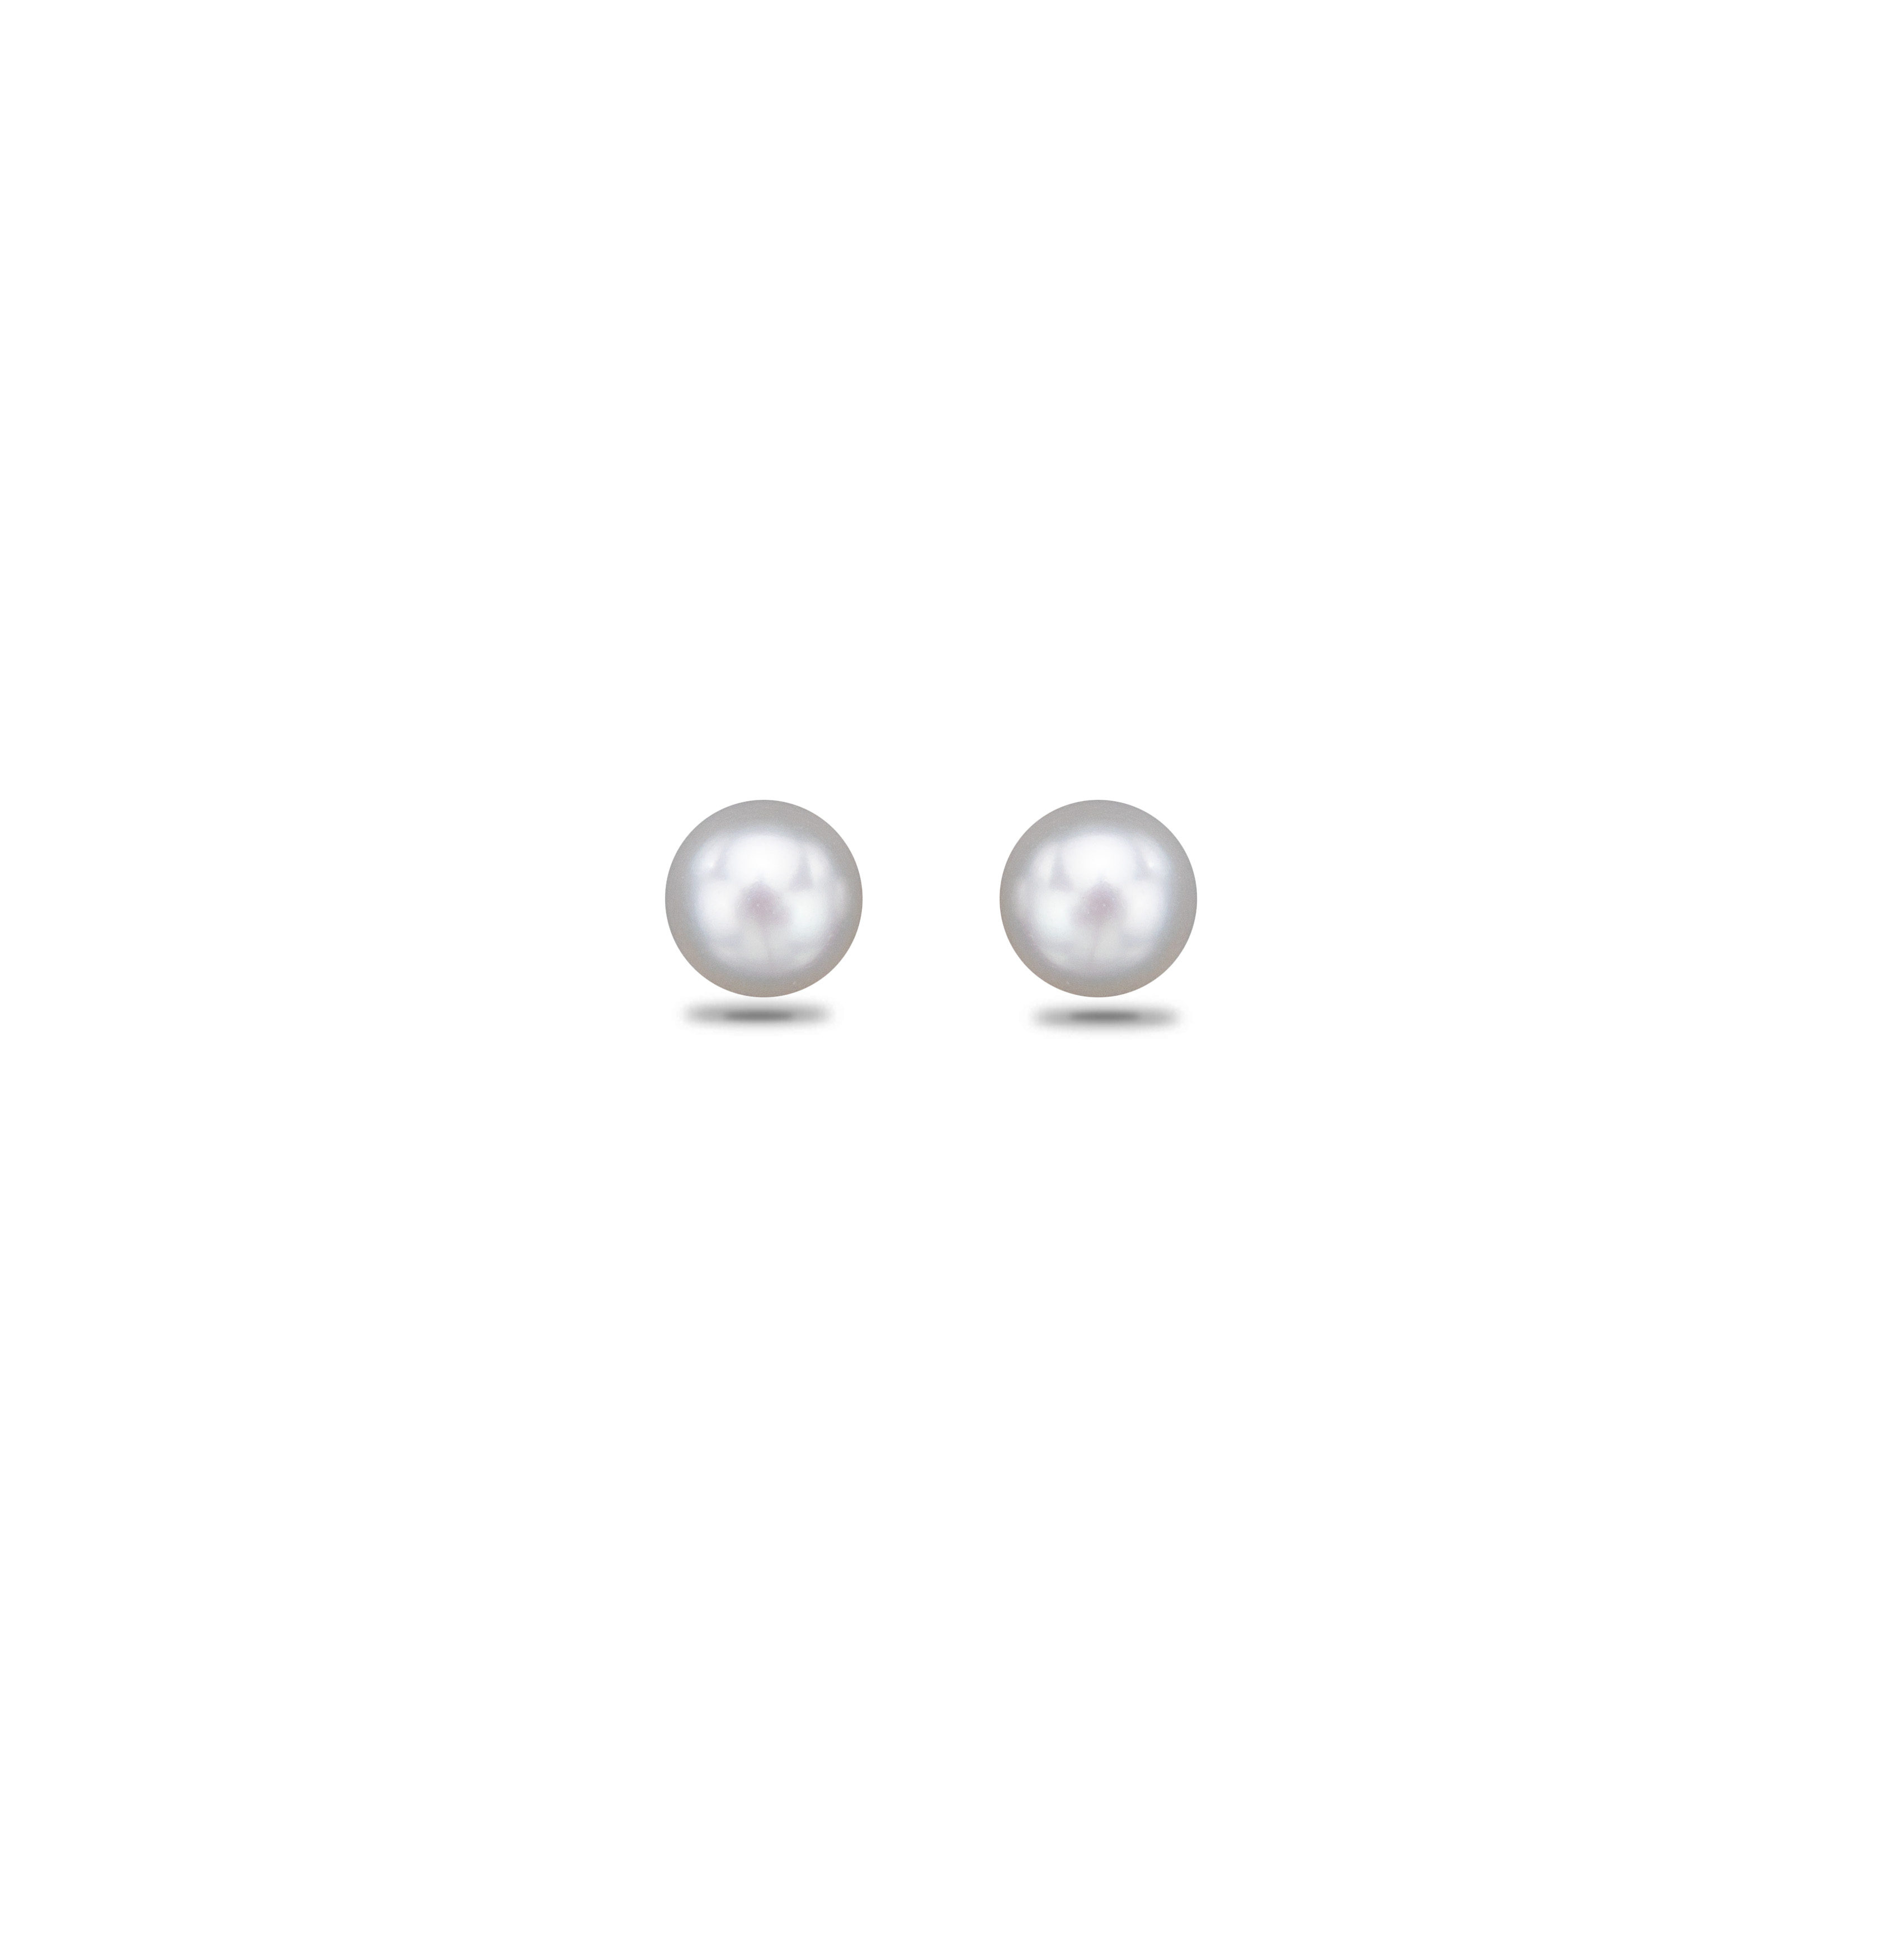 The best pearl earrings to add to your jewelry collection - Reviewed